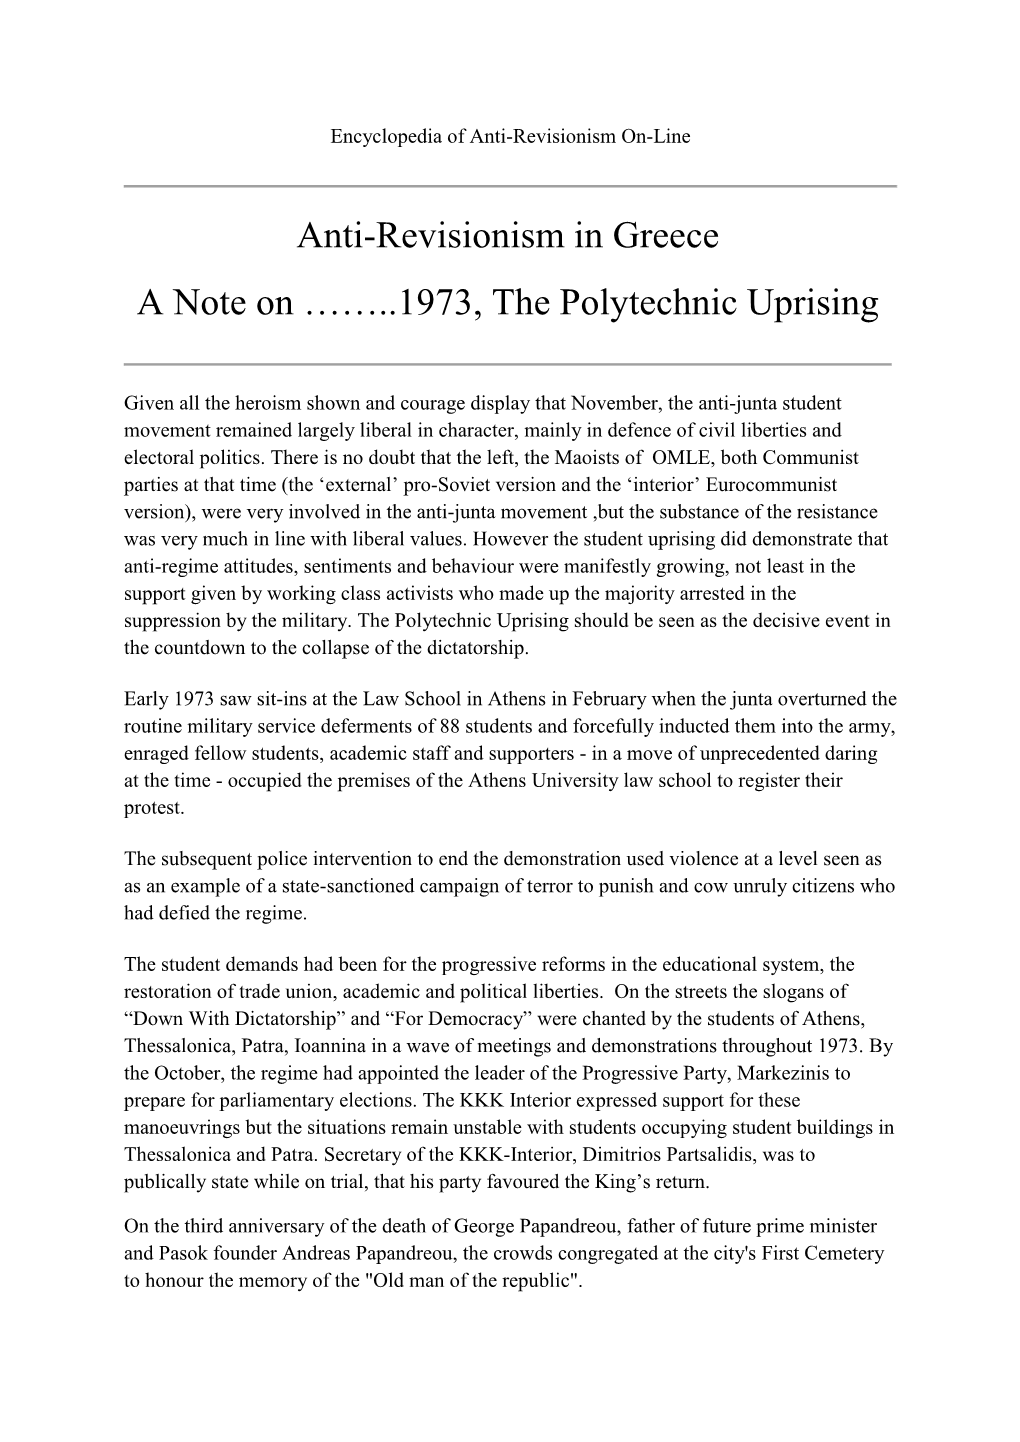 Anti-Revisionism in Greece a Note on ……..1973, the Polytechnic Uprising